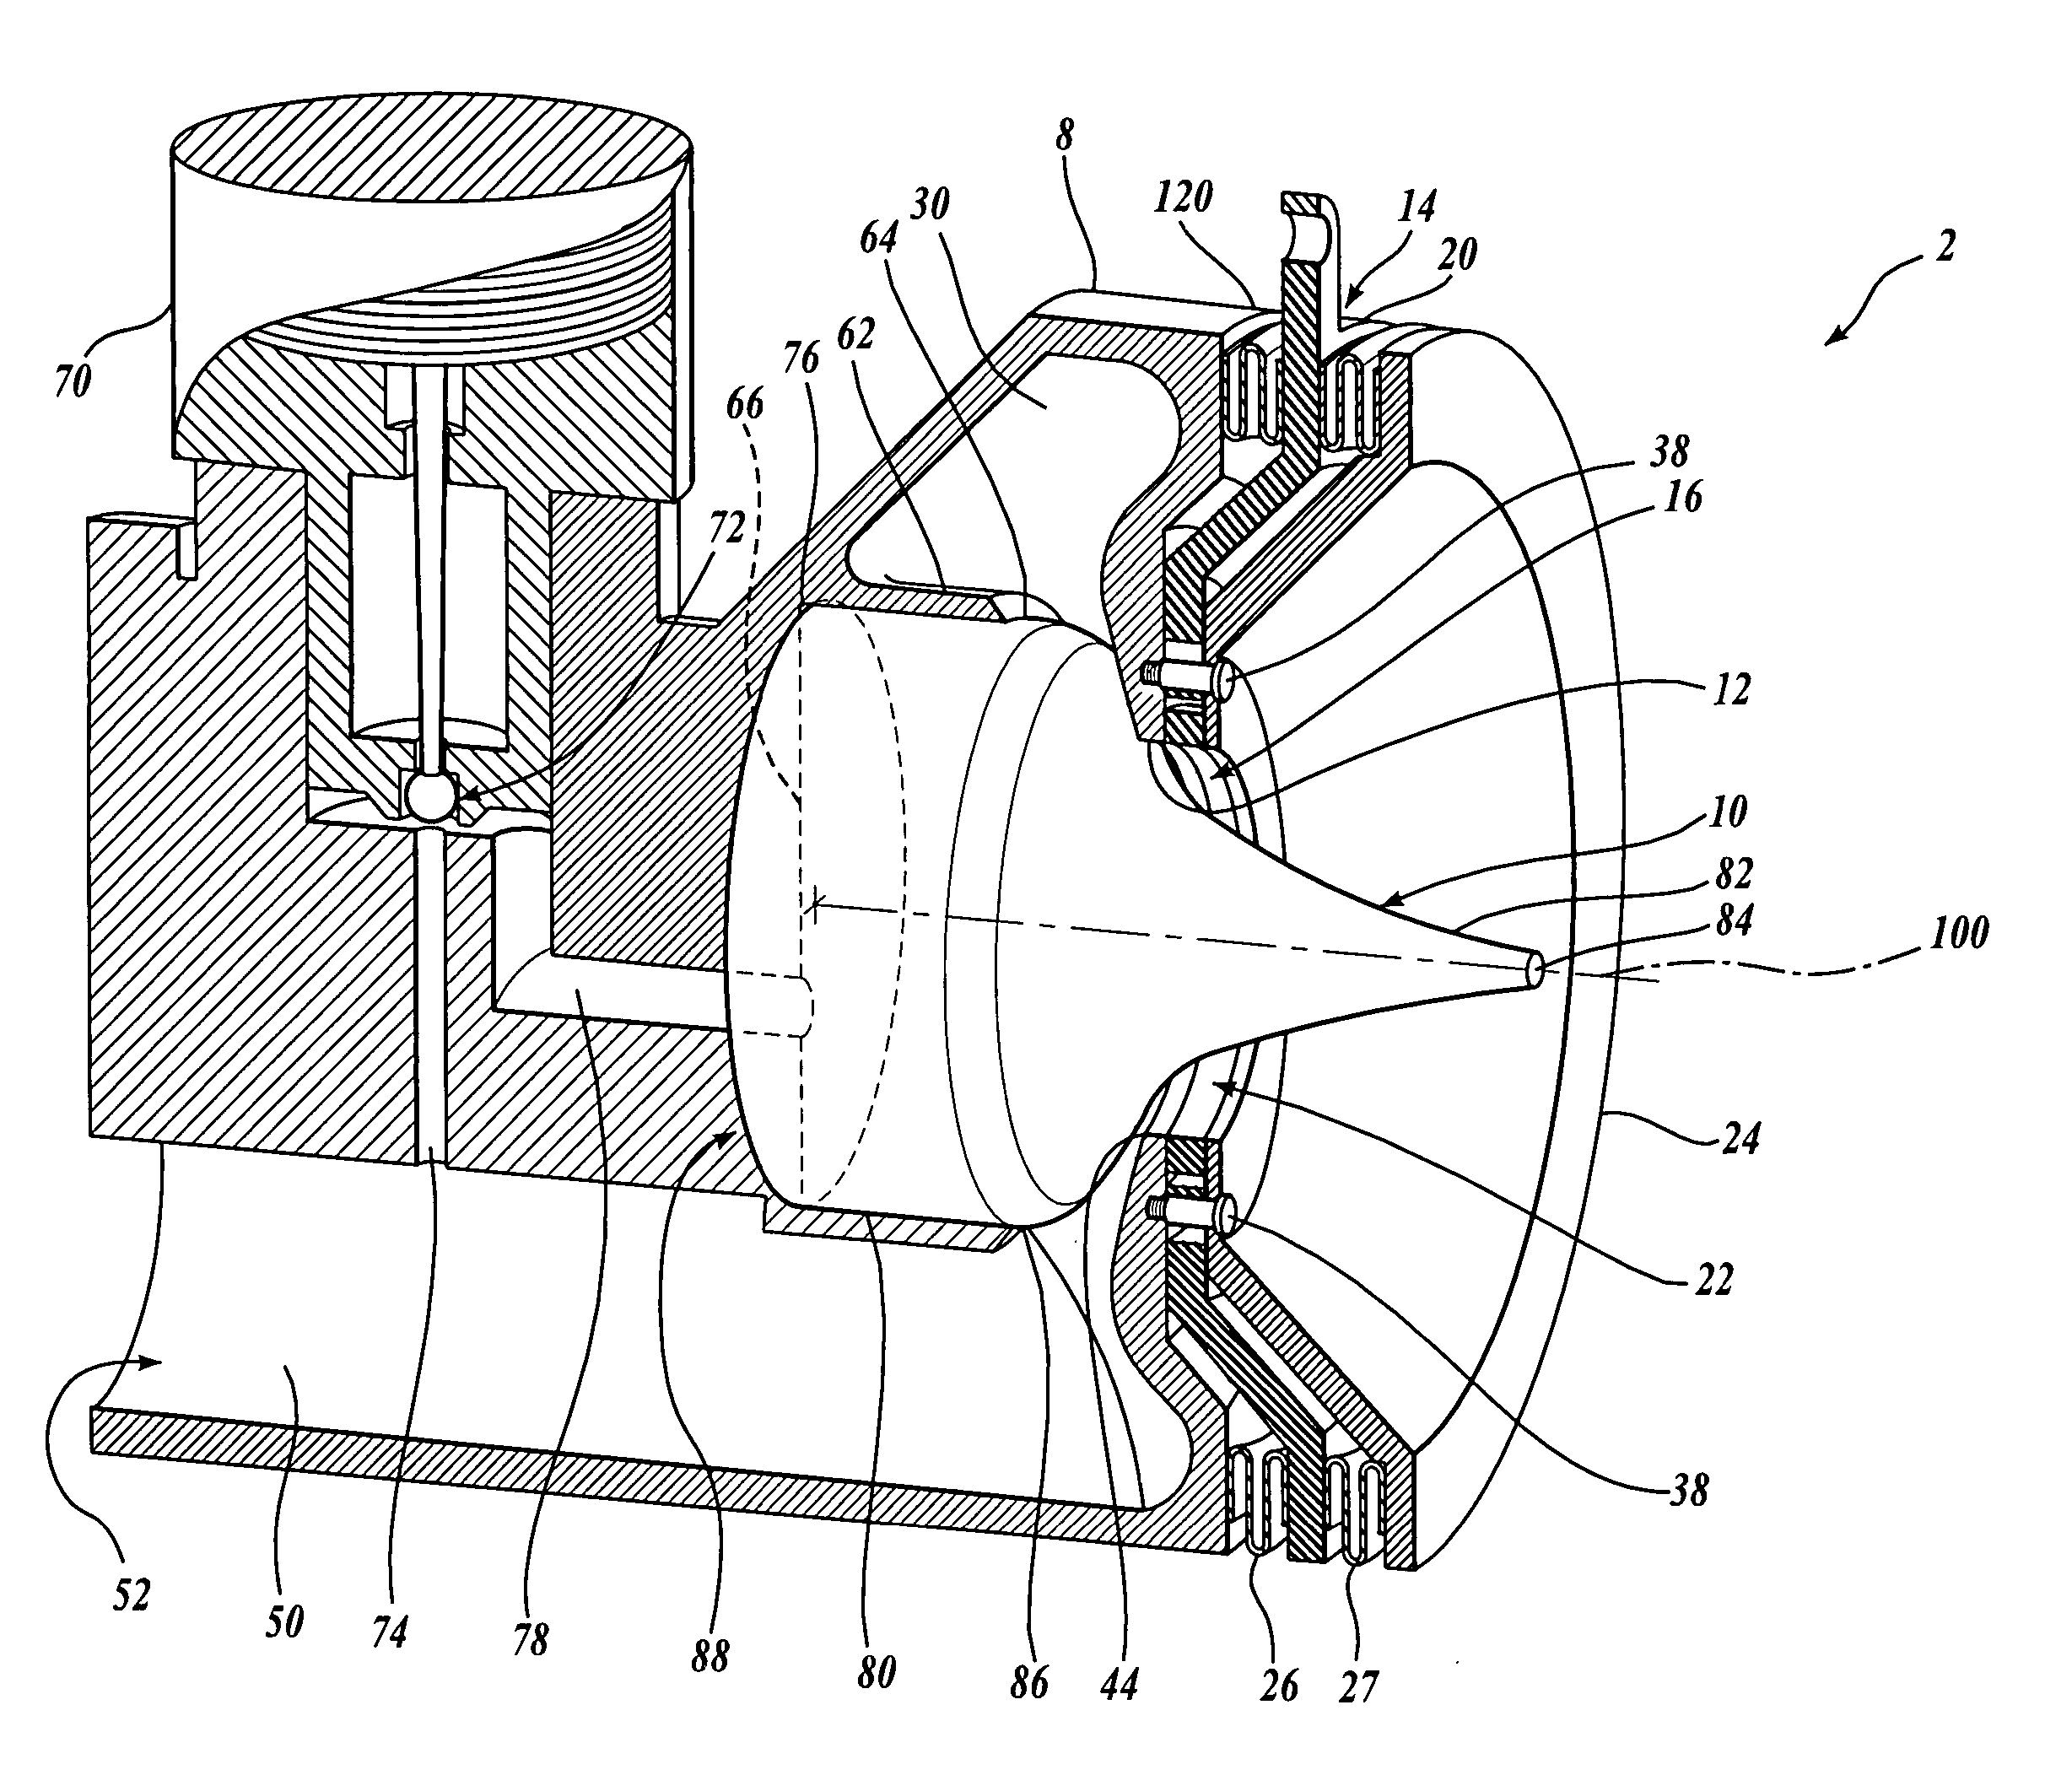 Thrust vector control system for a plug nozzle rocket engine